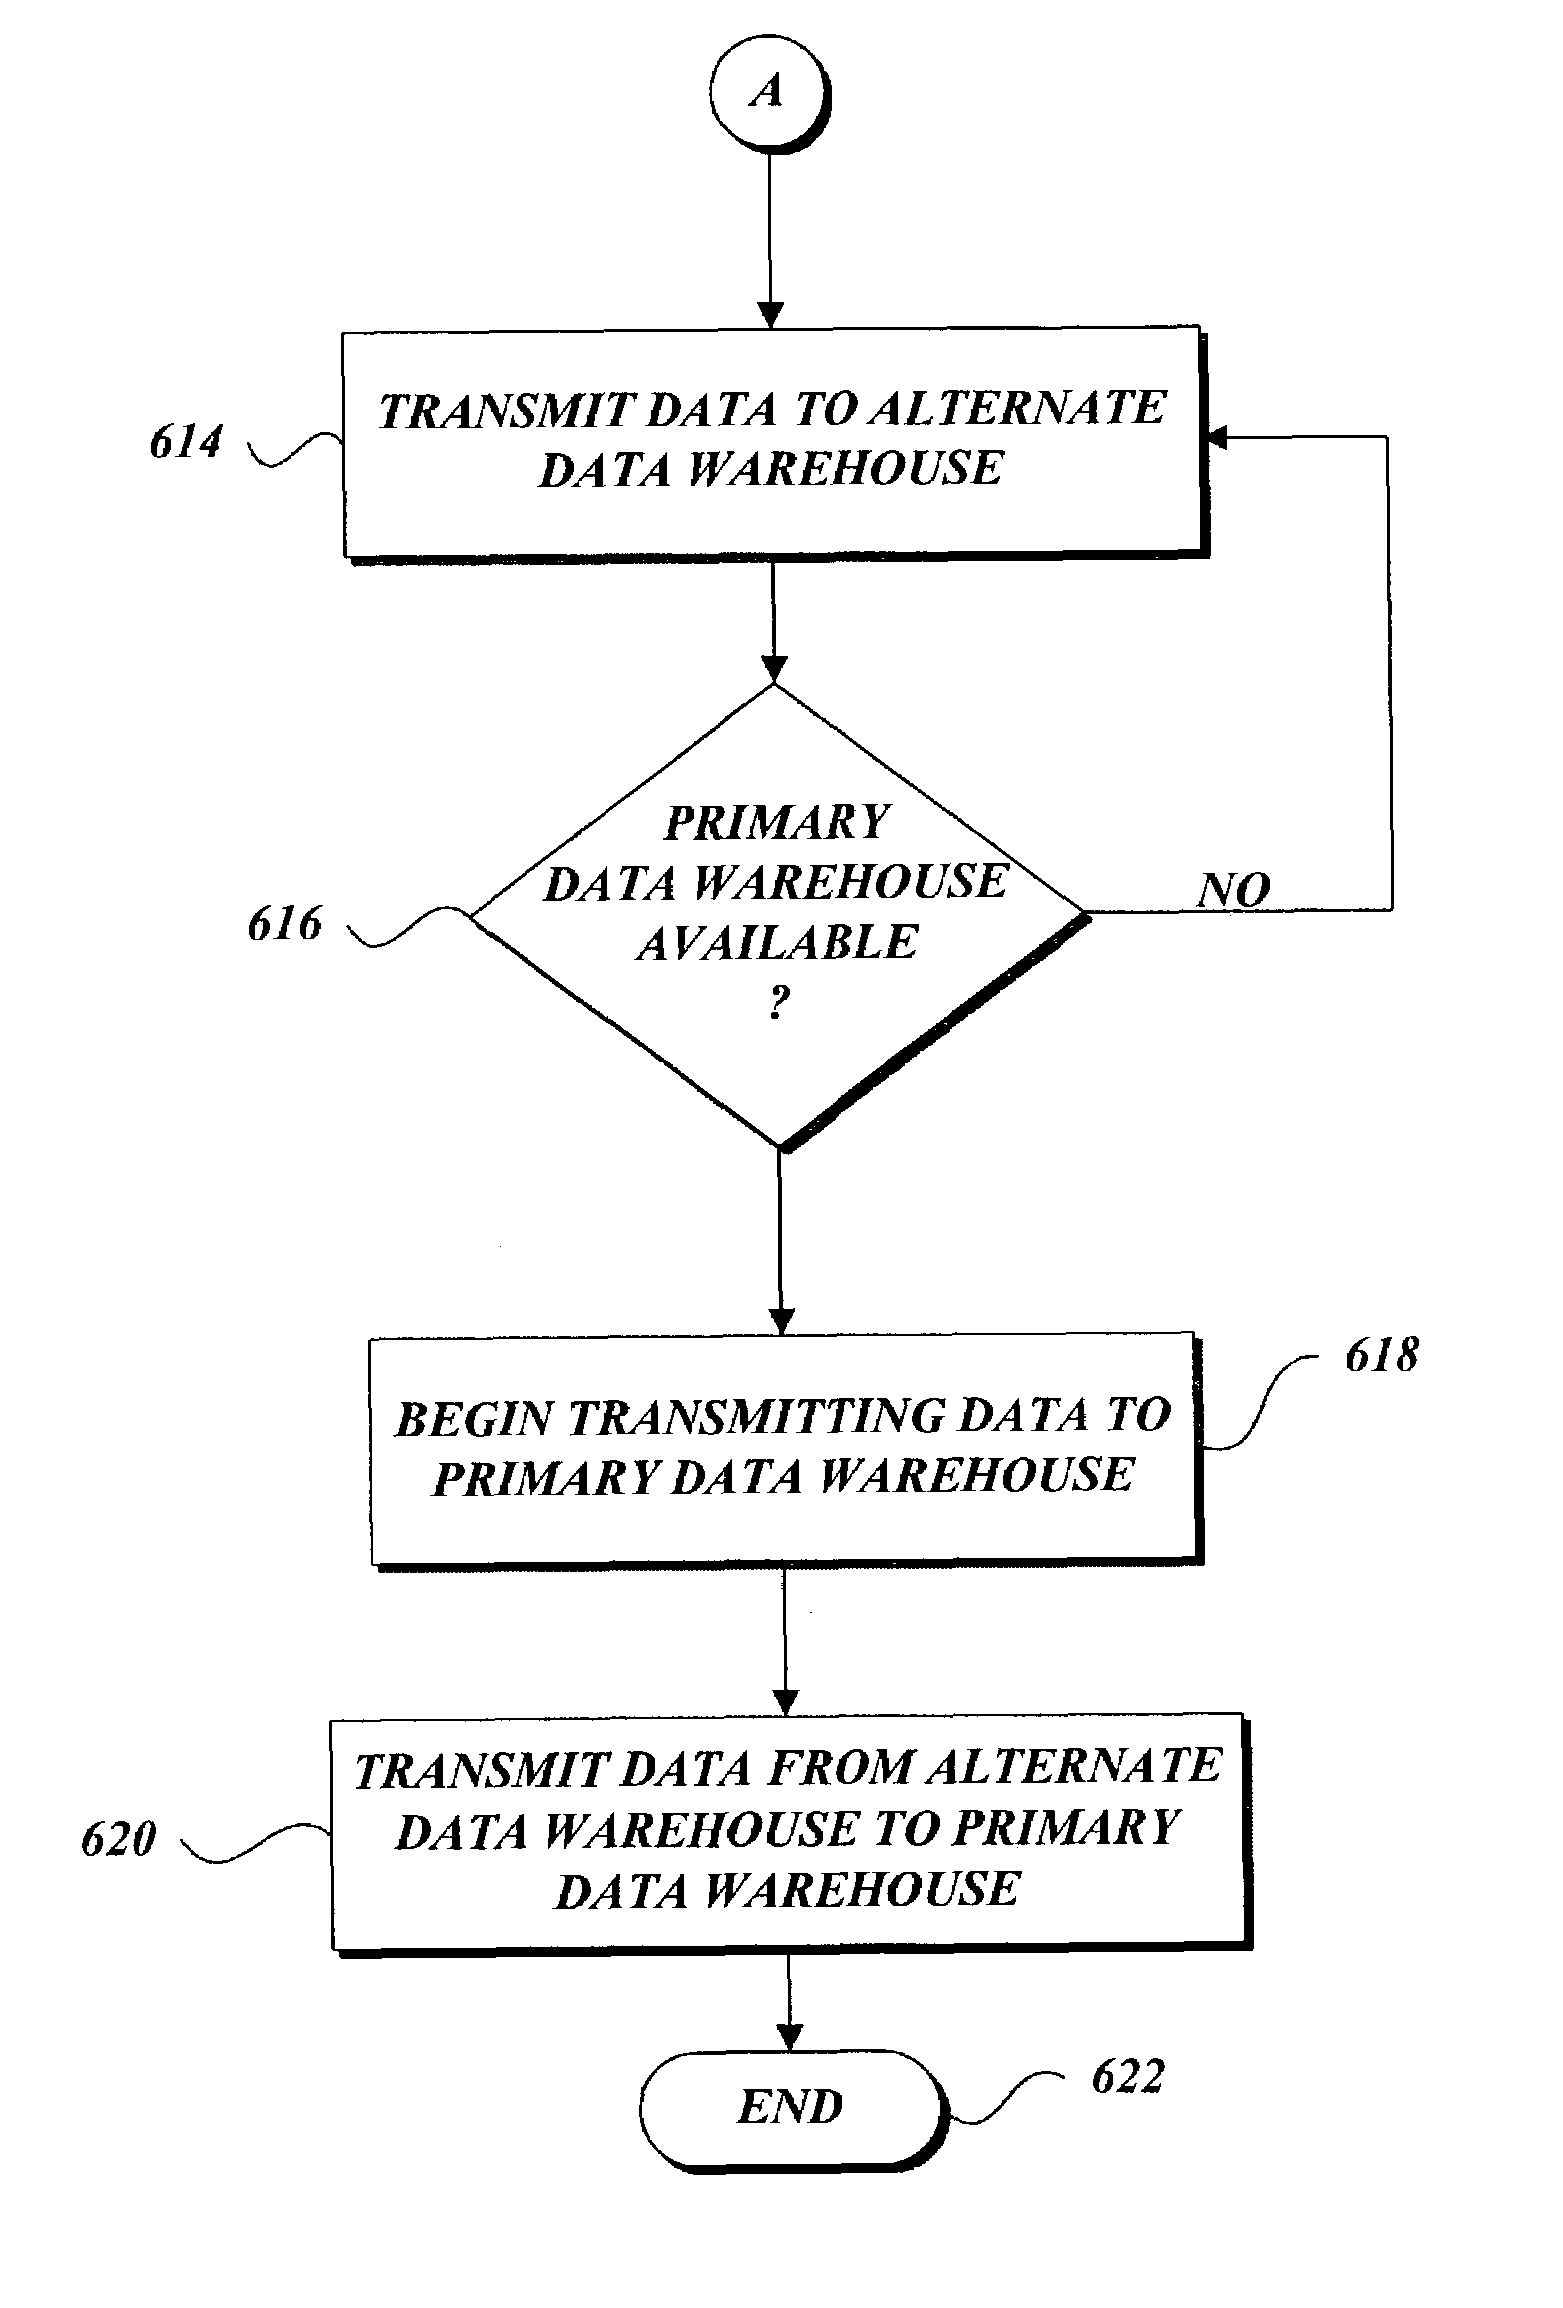 System for providing fault tolerant data warehousing environment by temporary transmitting data to alternate data warehouse during an interval of primary data warehouse failure